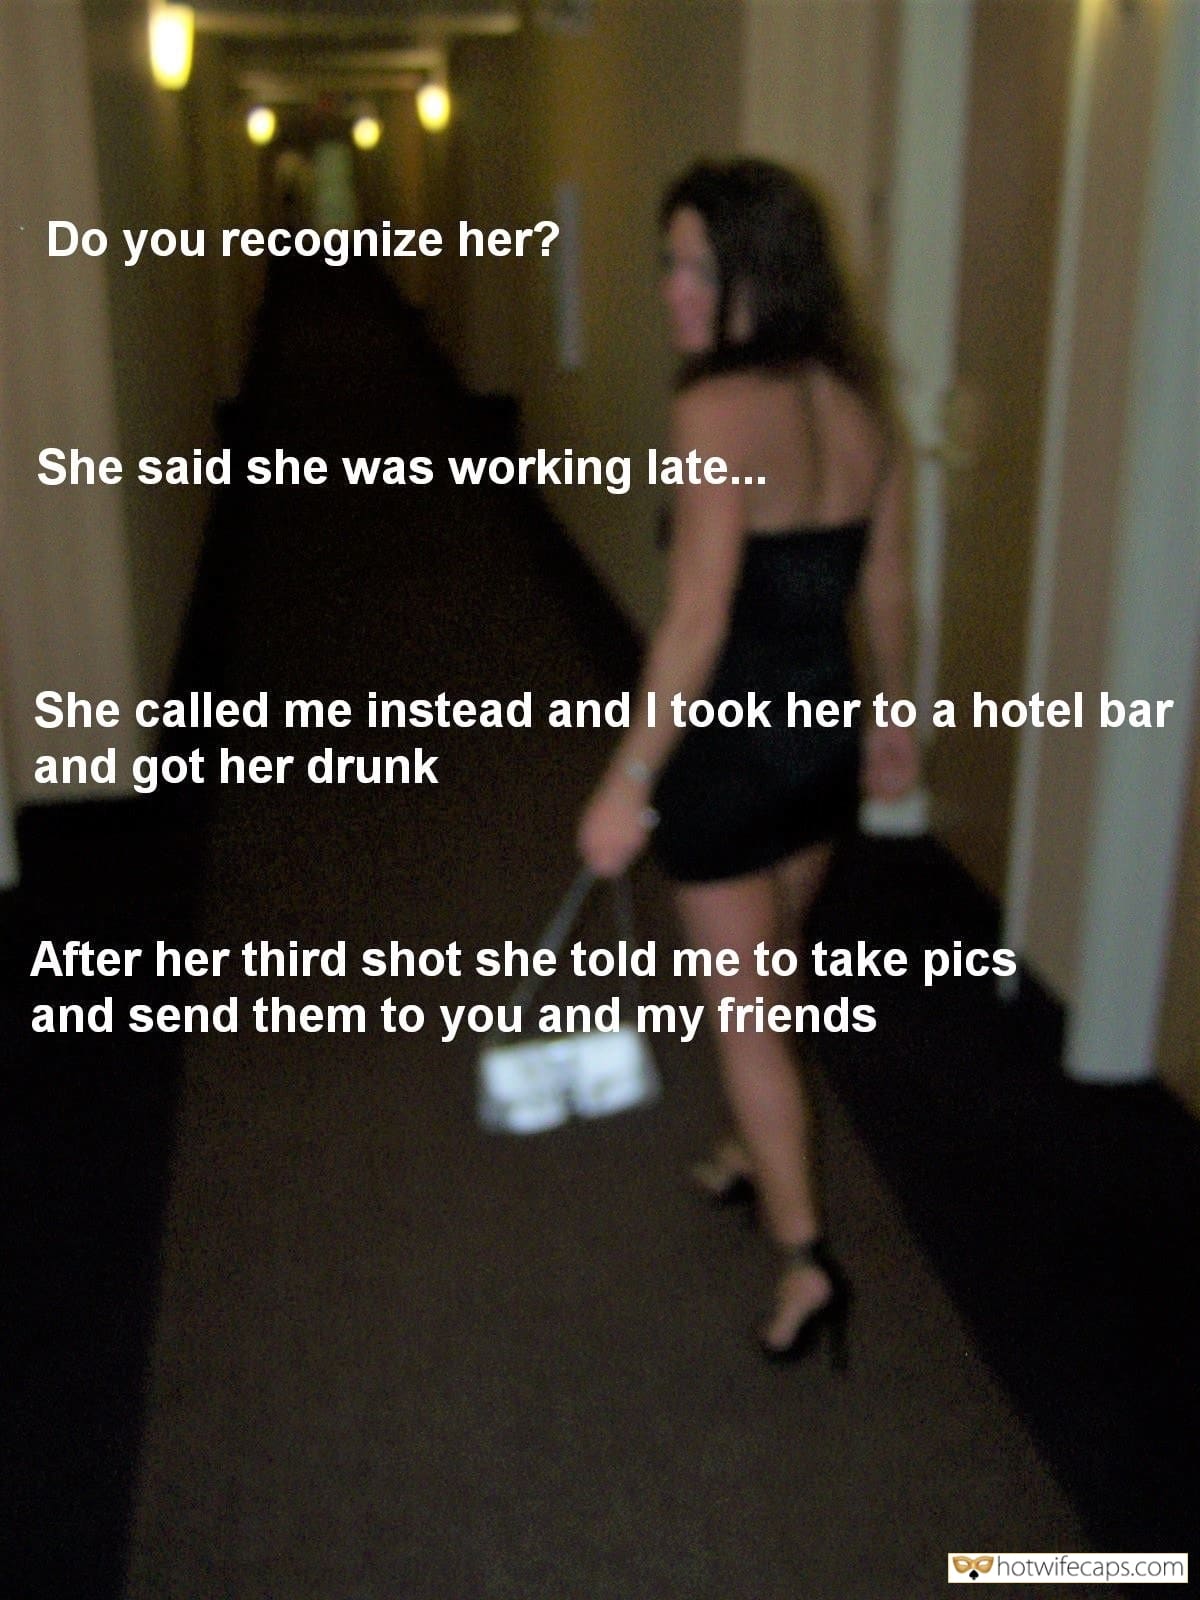 Cheating Bull hotwife caption: Do you recognize her? She said she was working late… She called me instead and I took her to a hotel bar and got her drunk After her third shot she told me to take pics and send them to...